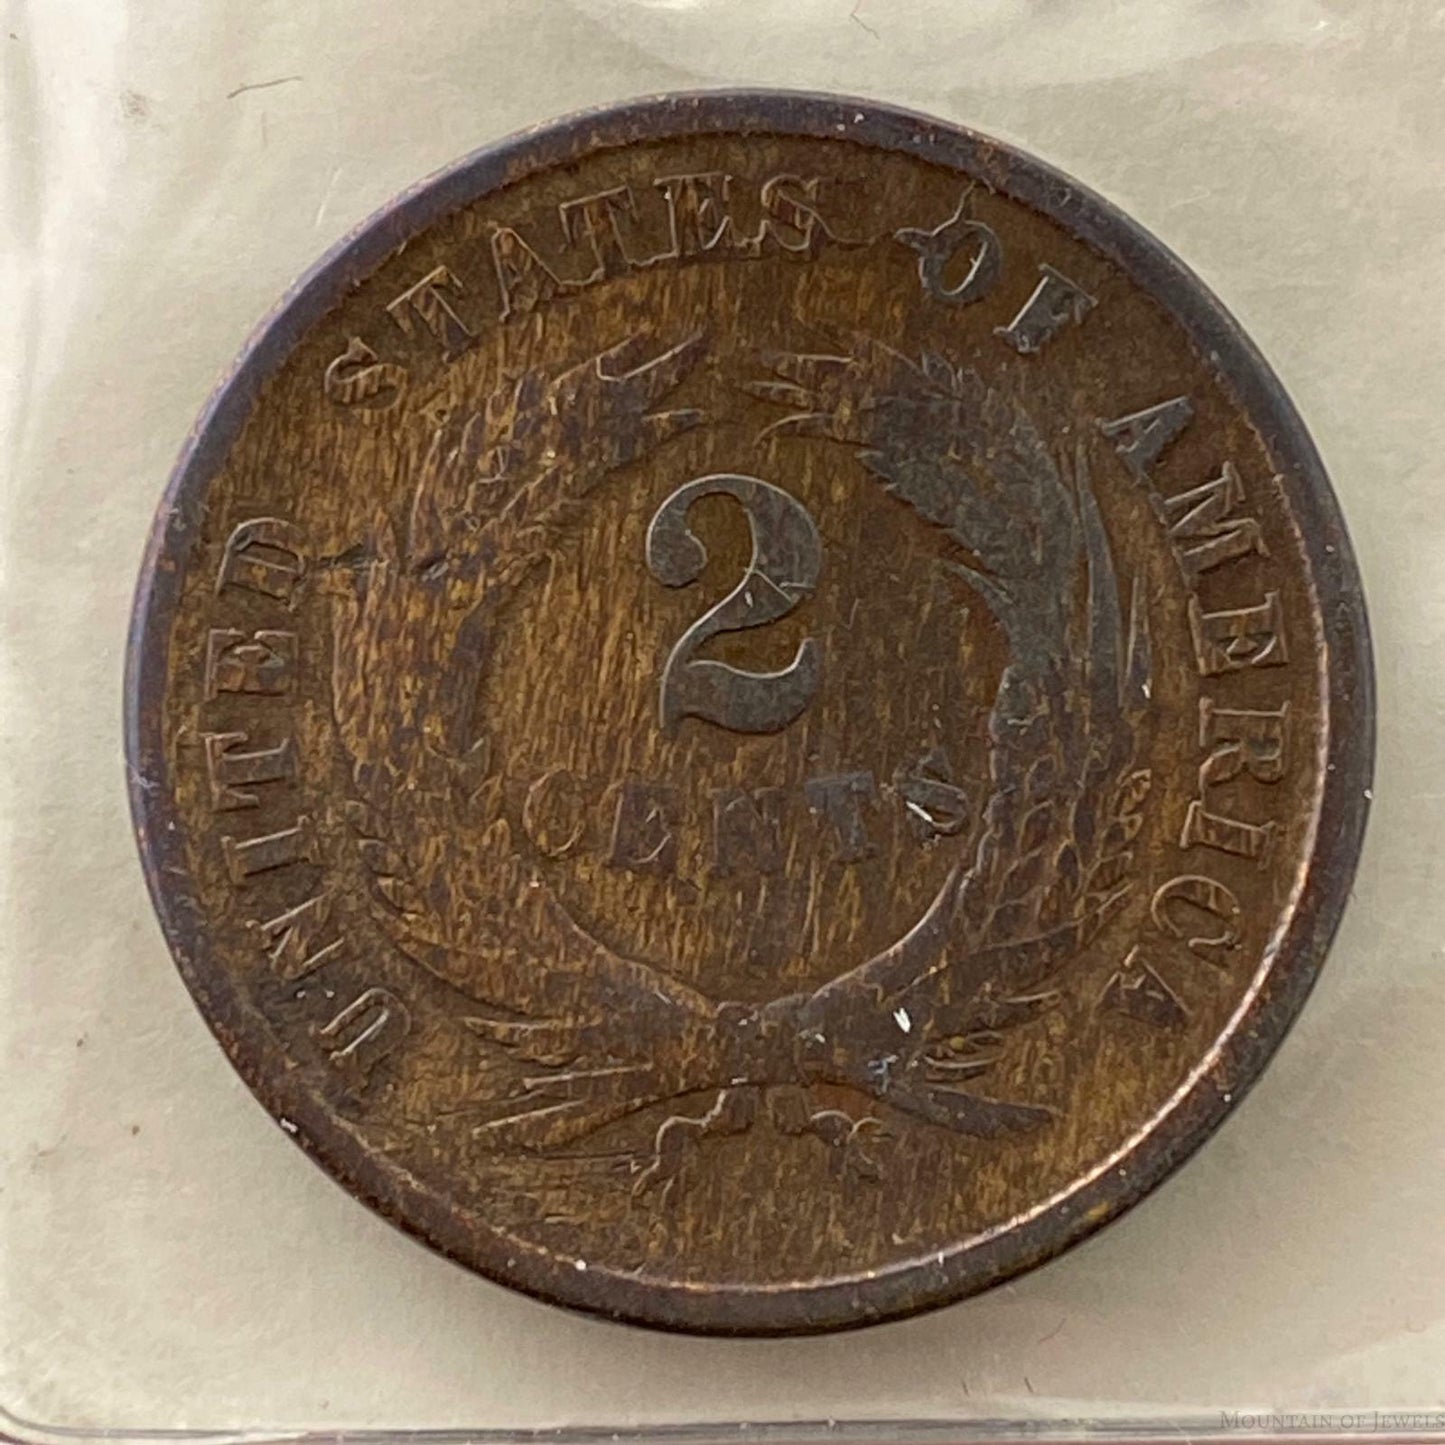 1864 US Two (2) Cent Piece Circulation Strike VG Collectible Coin